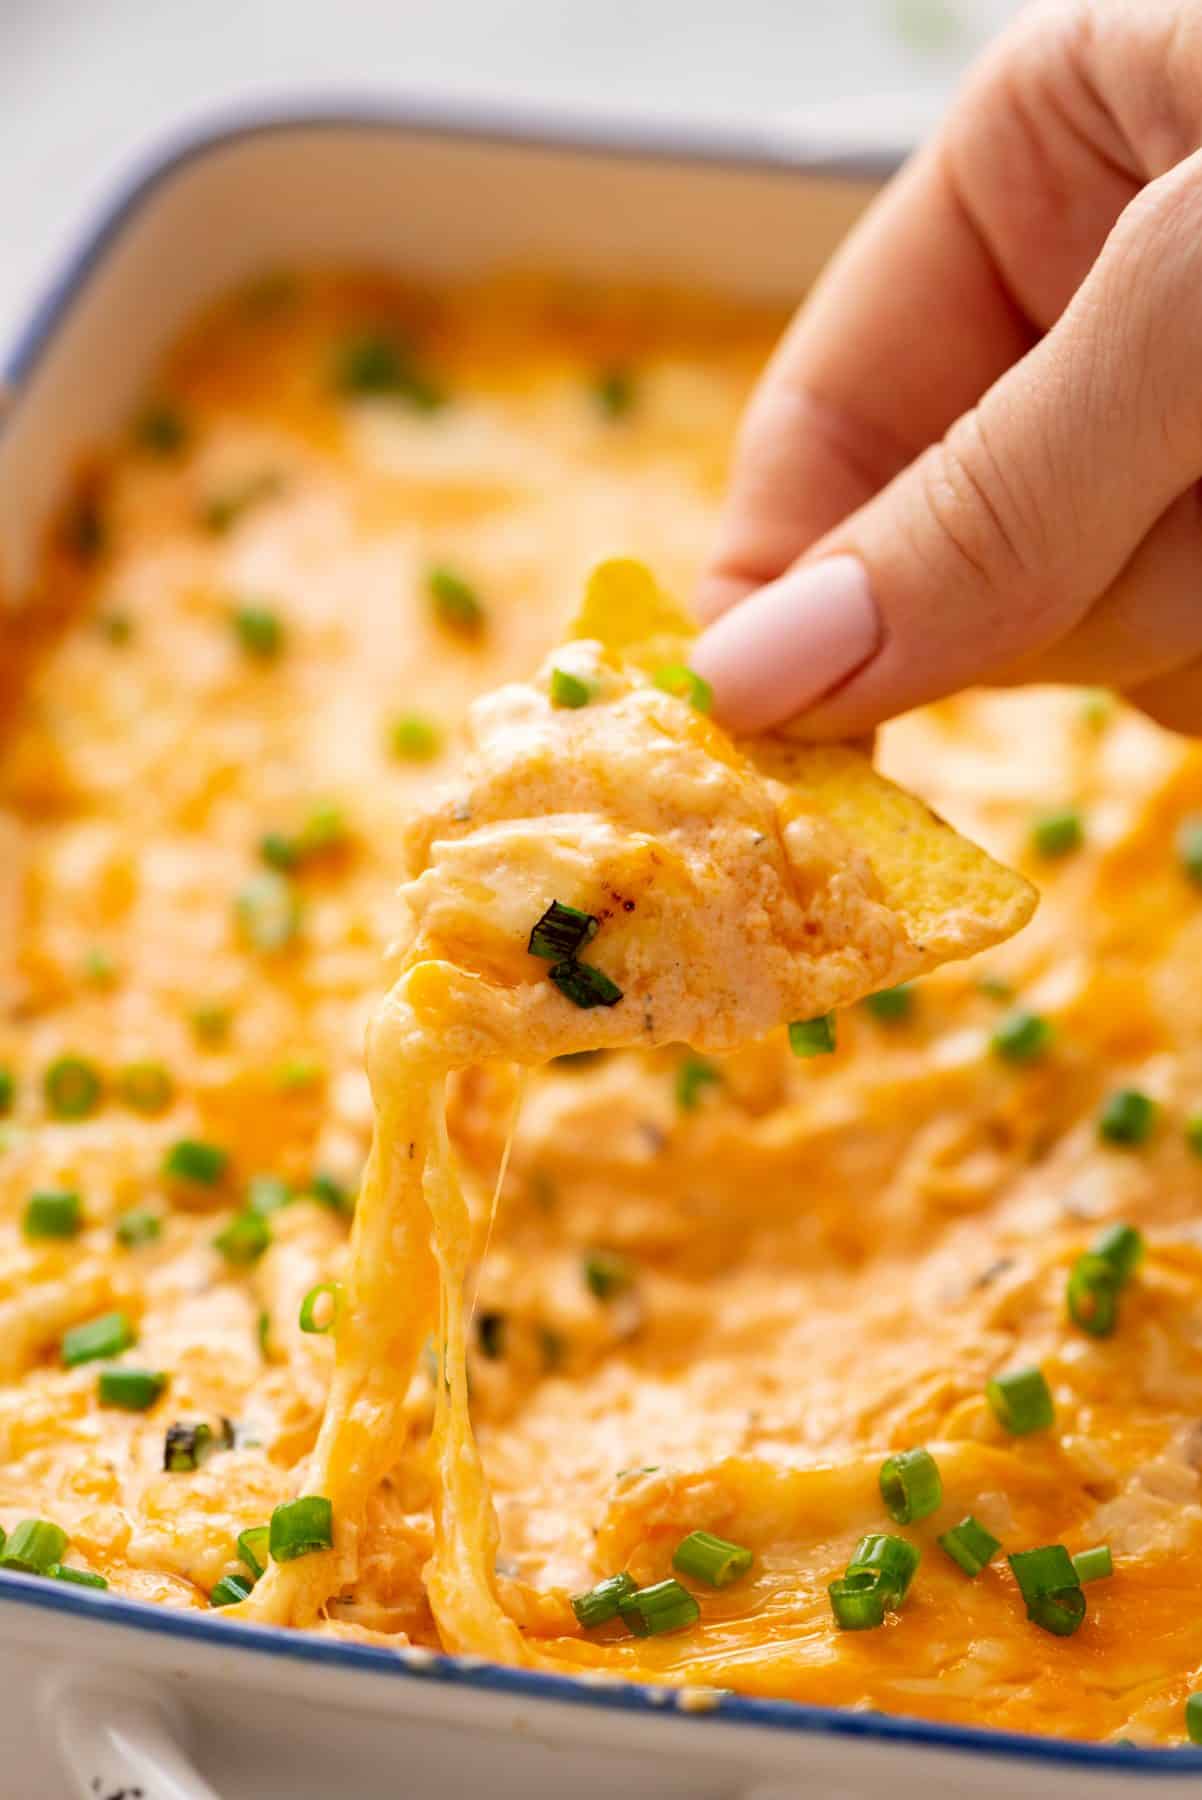 A hand dipping a tortilla chip in a dish of Buffalo Chicken Dip